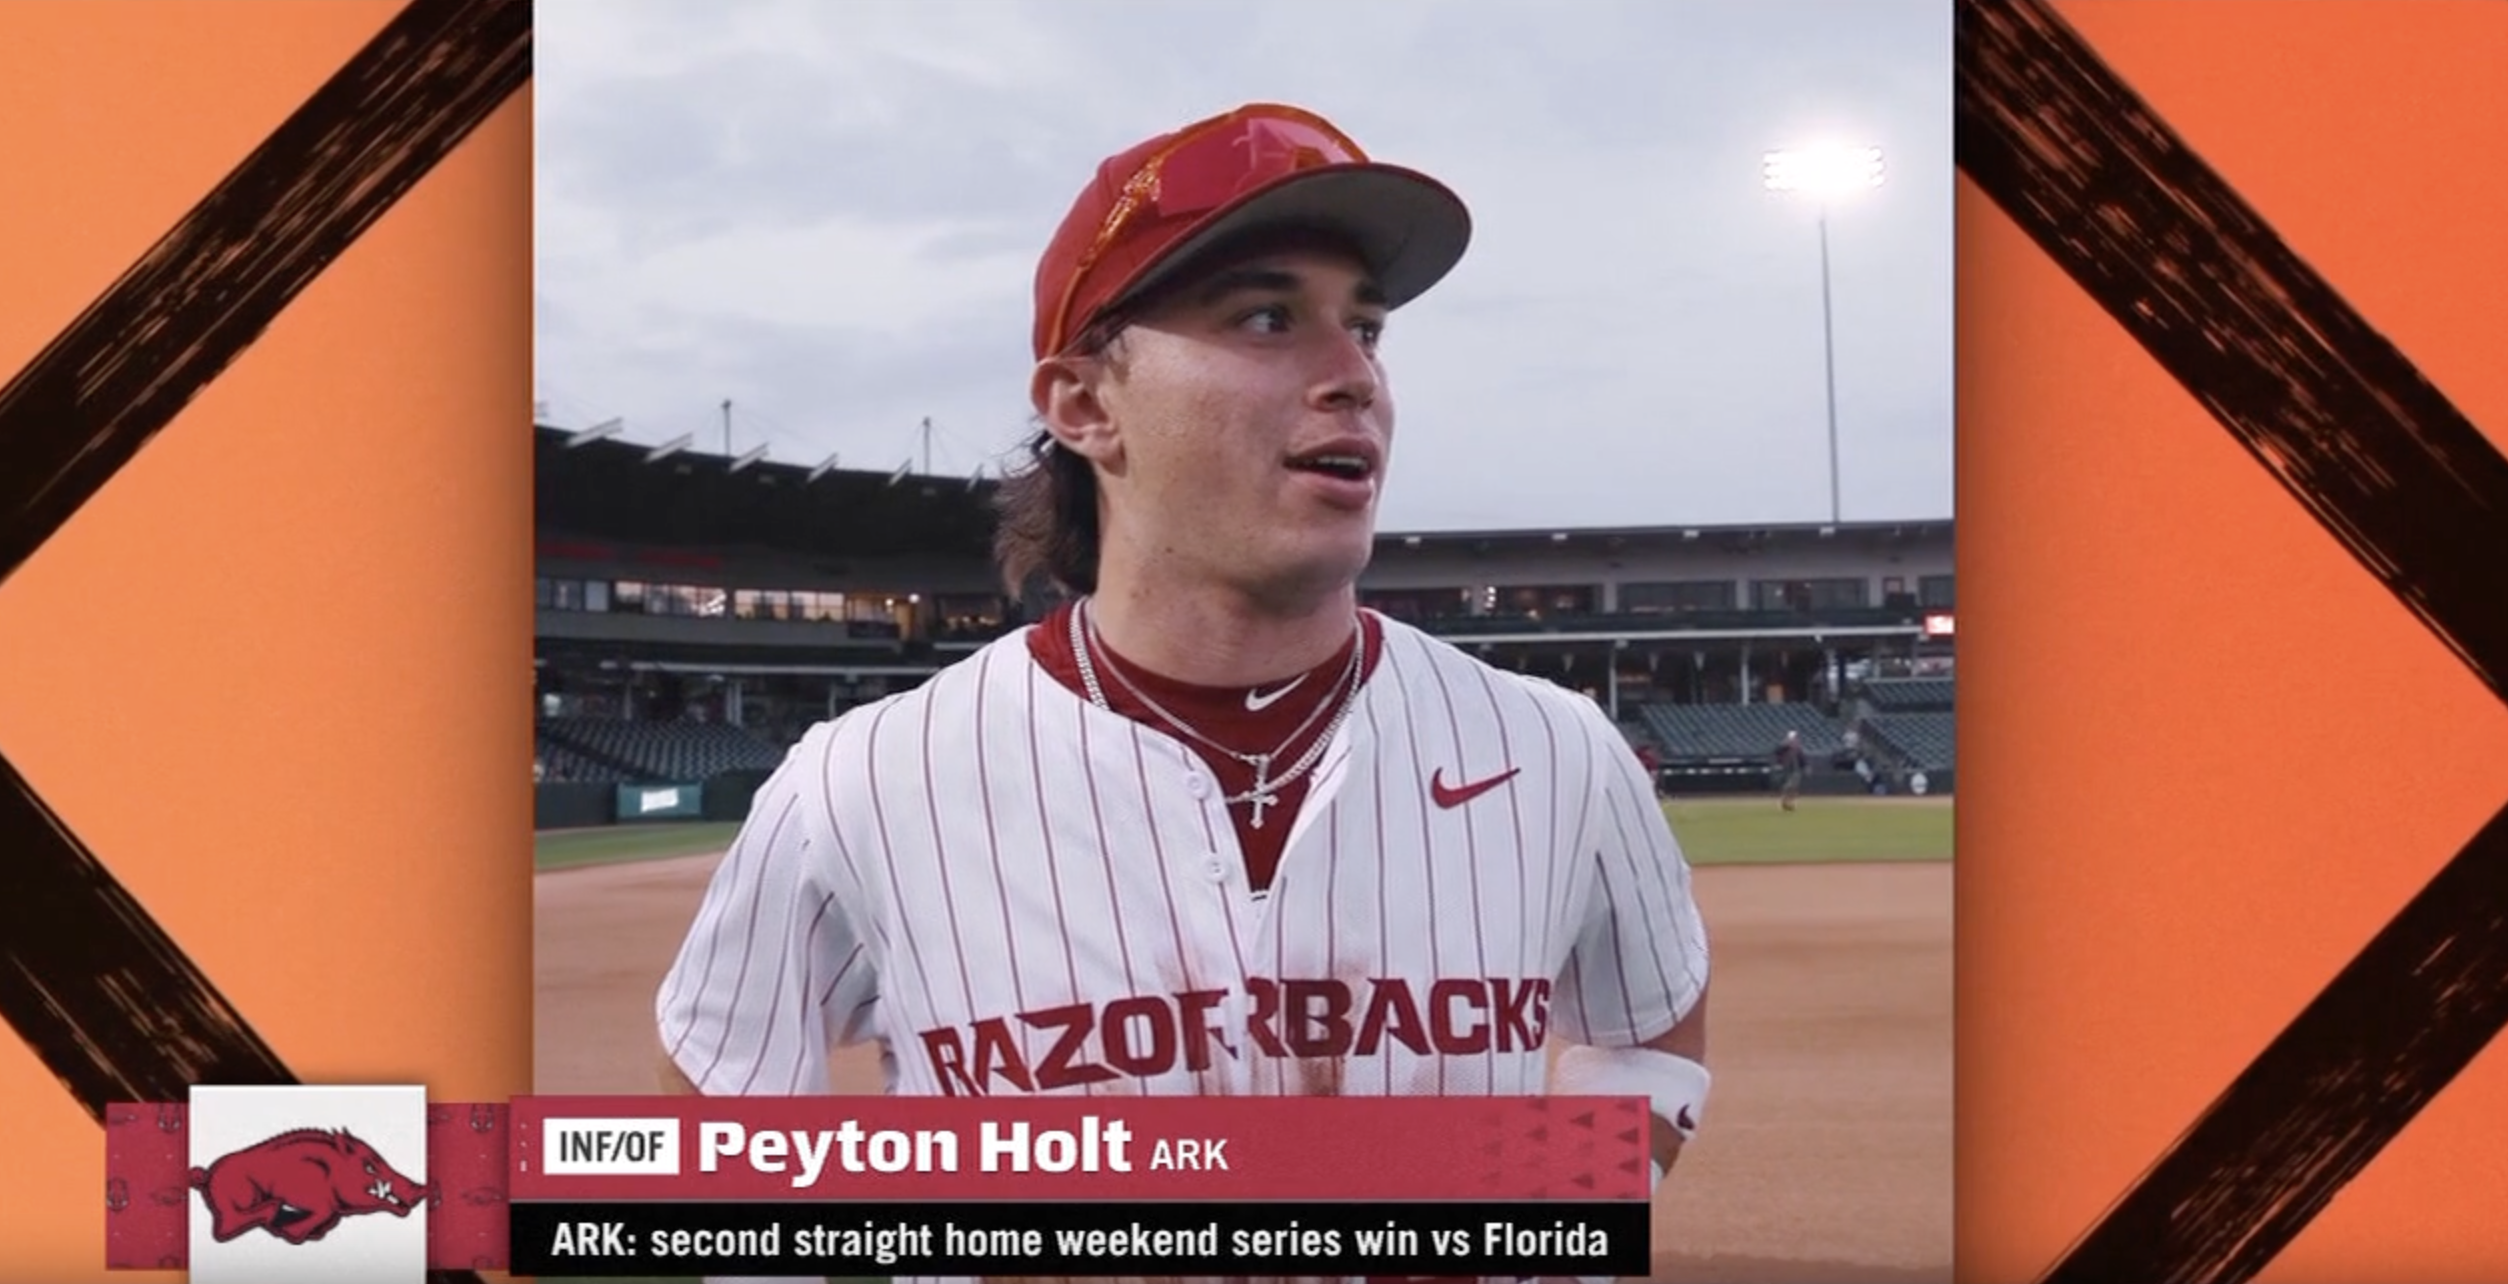 WATCH: Peyton Holt’s Deke Double Play on Rally Cap